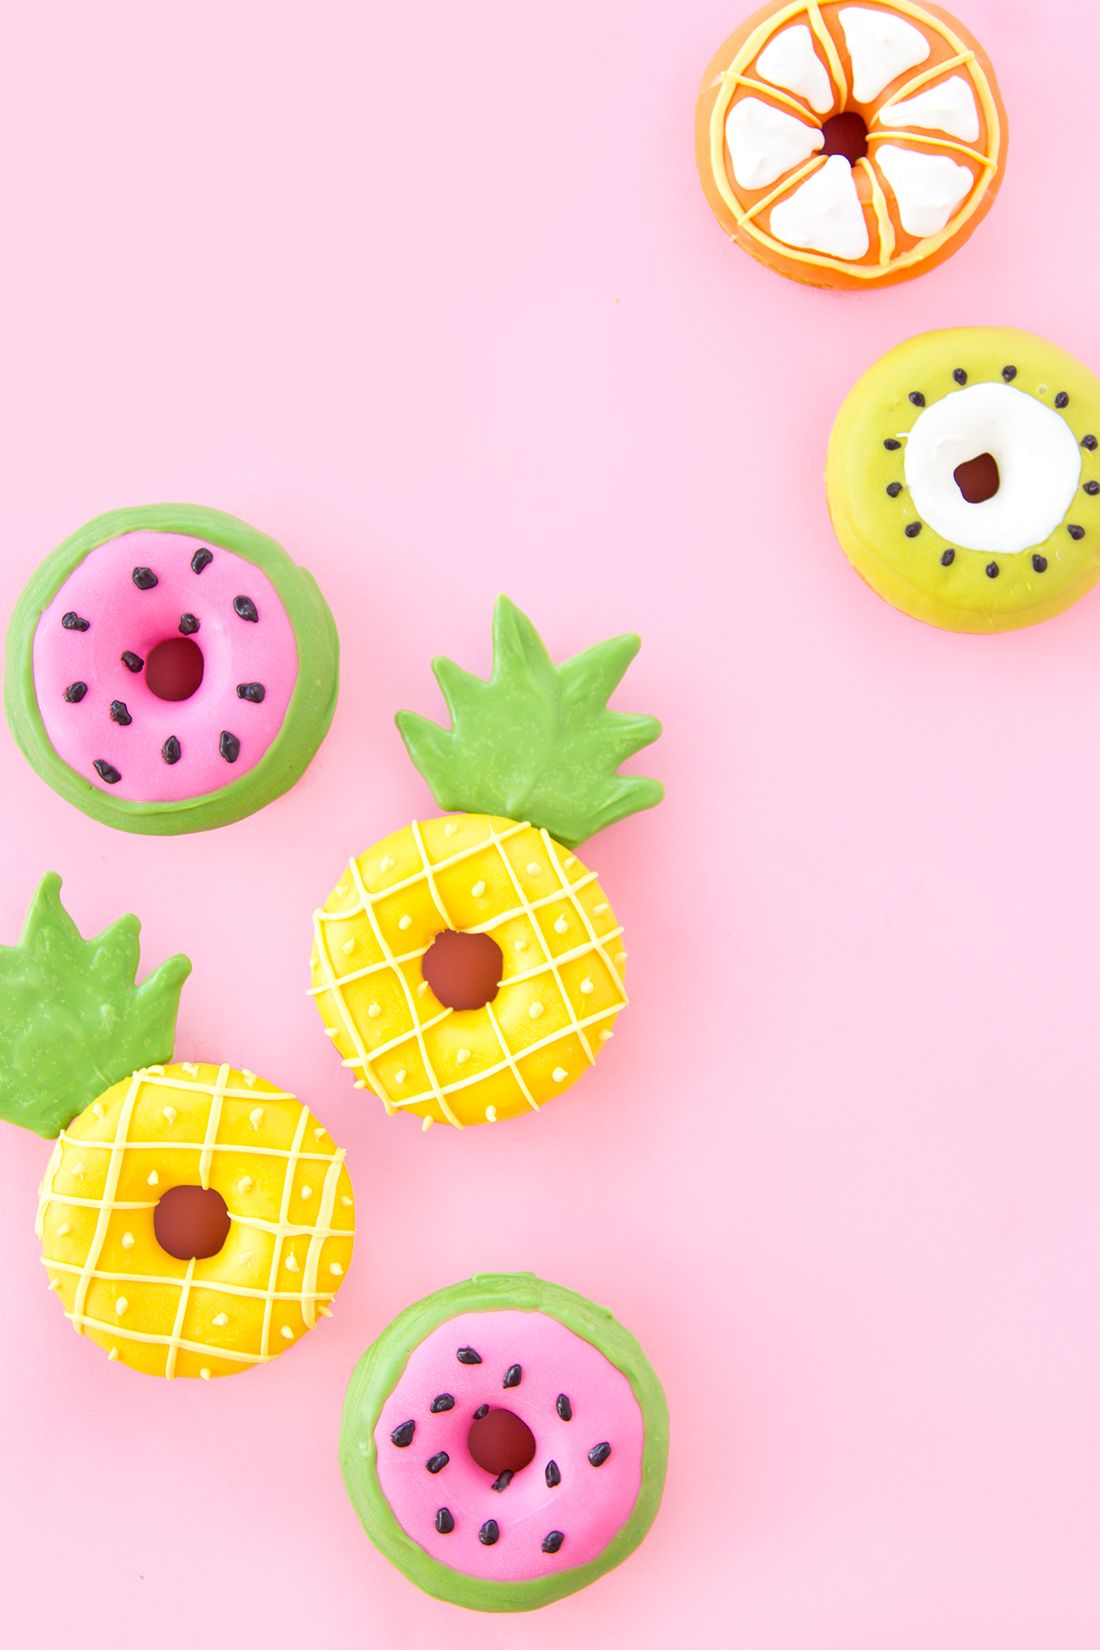 Donut Eat Sweets Fritter Nutcake Lock Wallpaper APK pour Android Télécharger